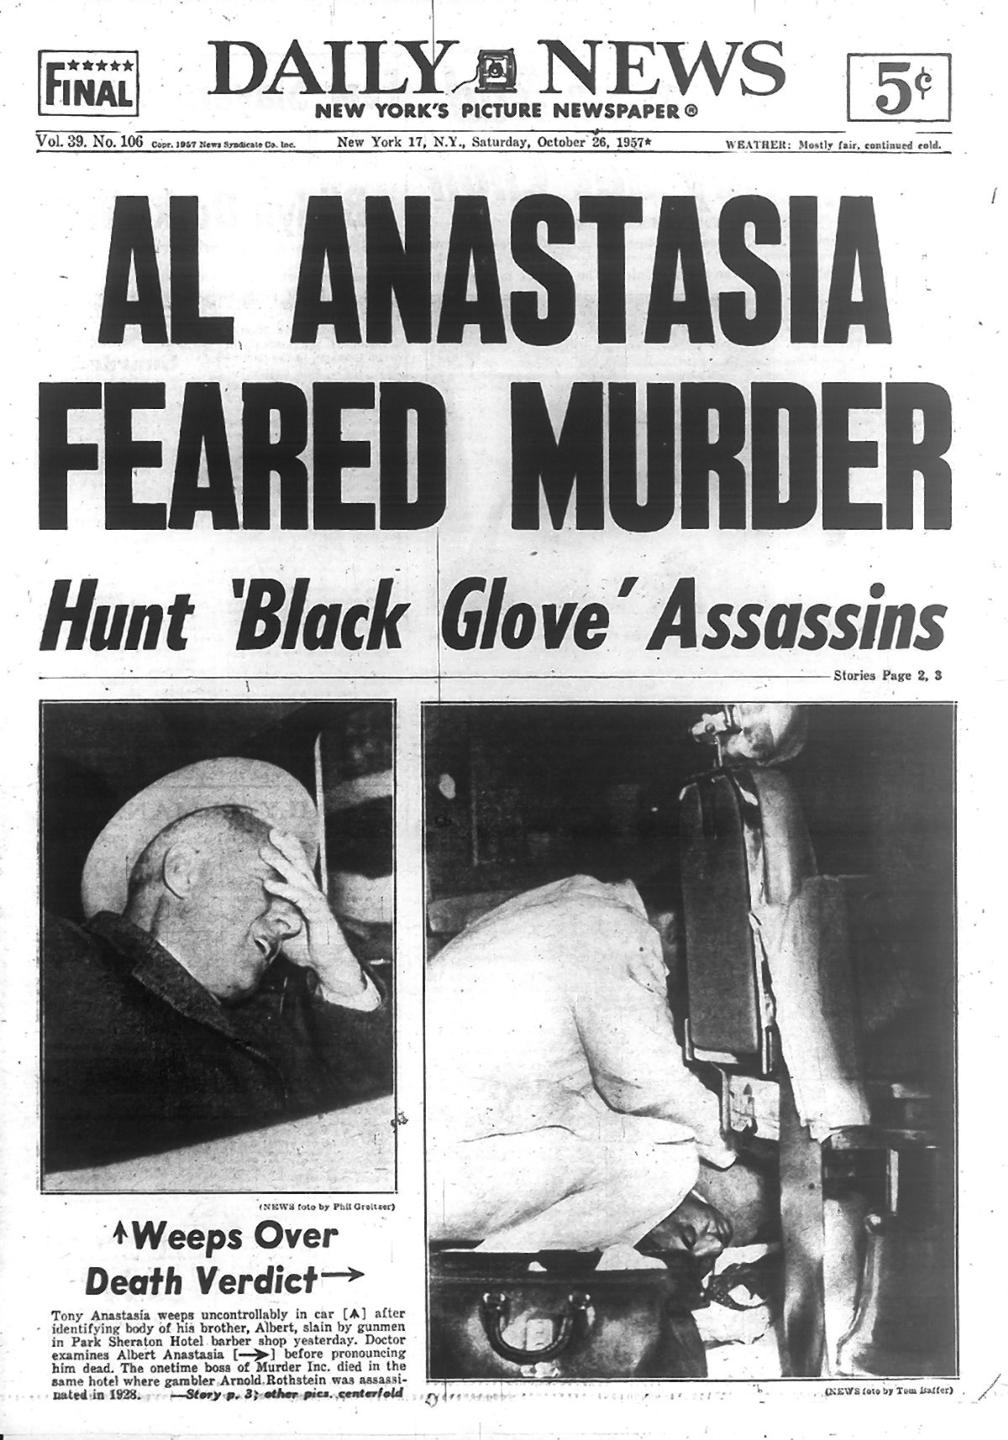 Mobster Albert Anastasia is murdered at a barbershop in 1957 – New York Daily News